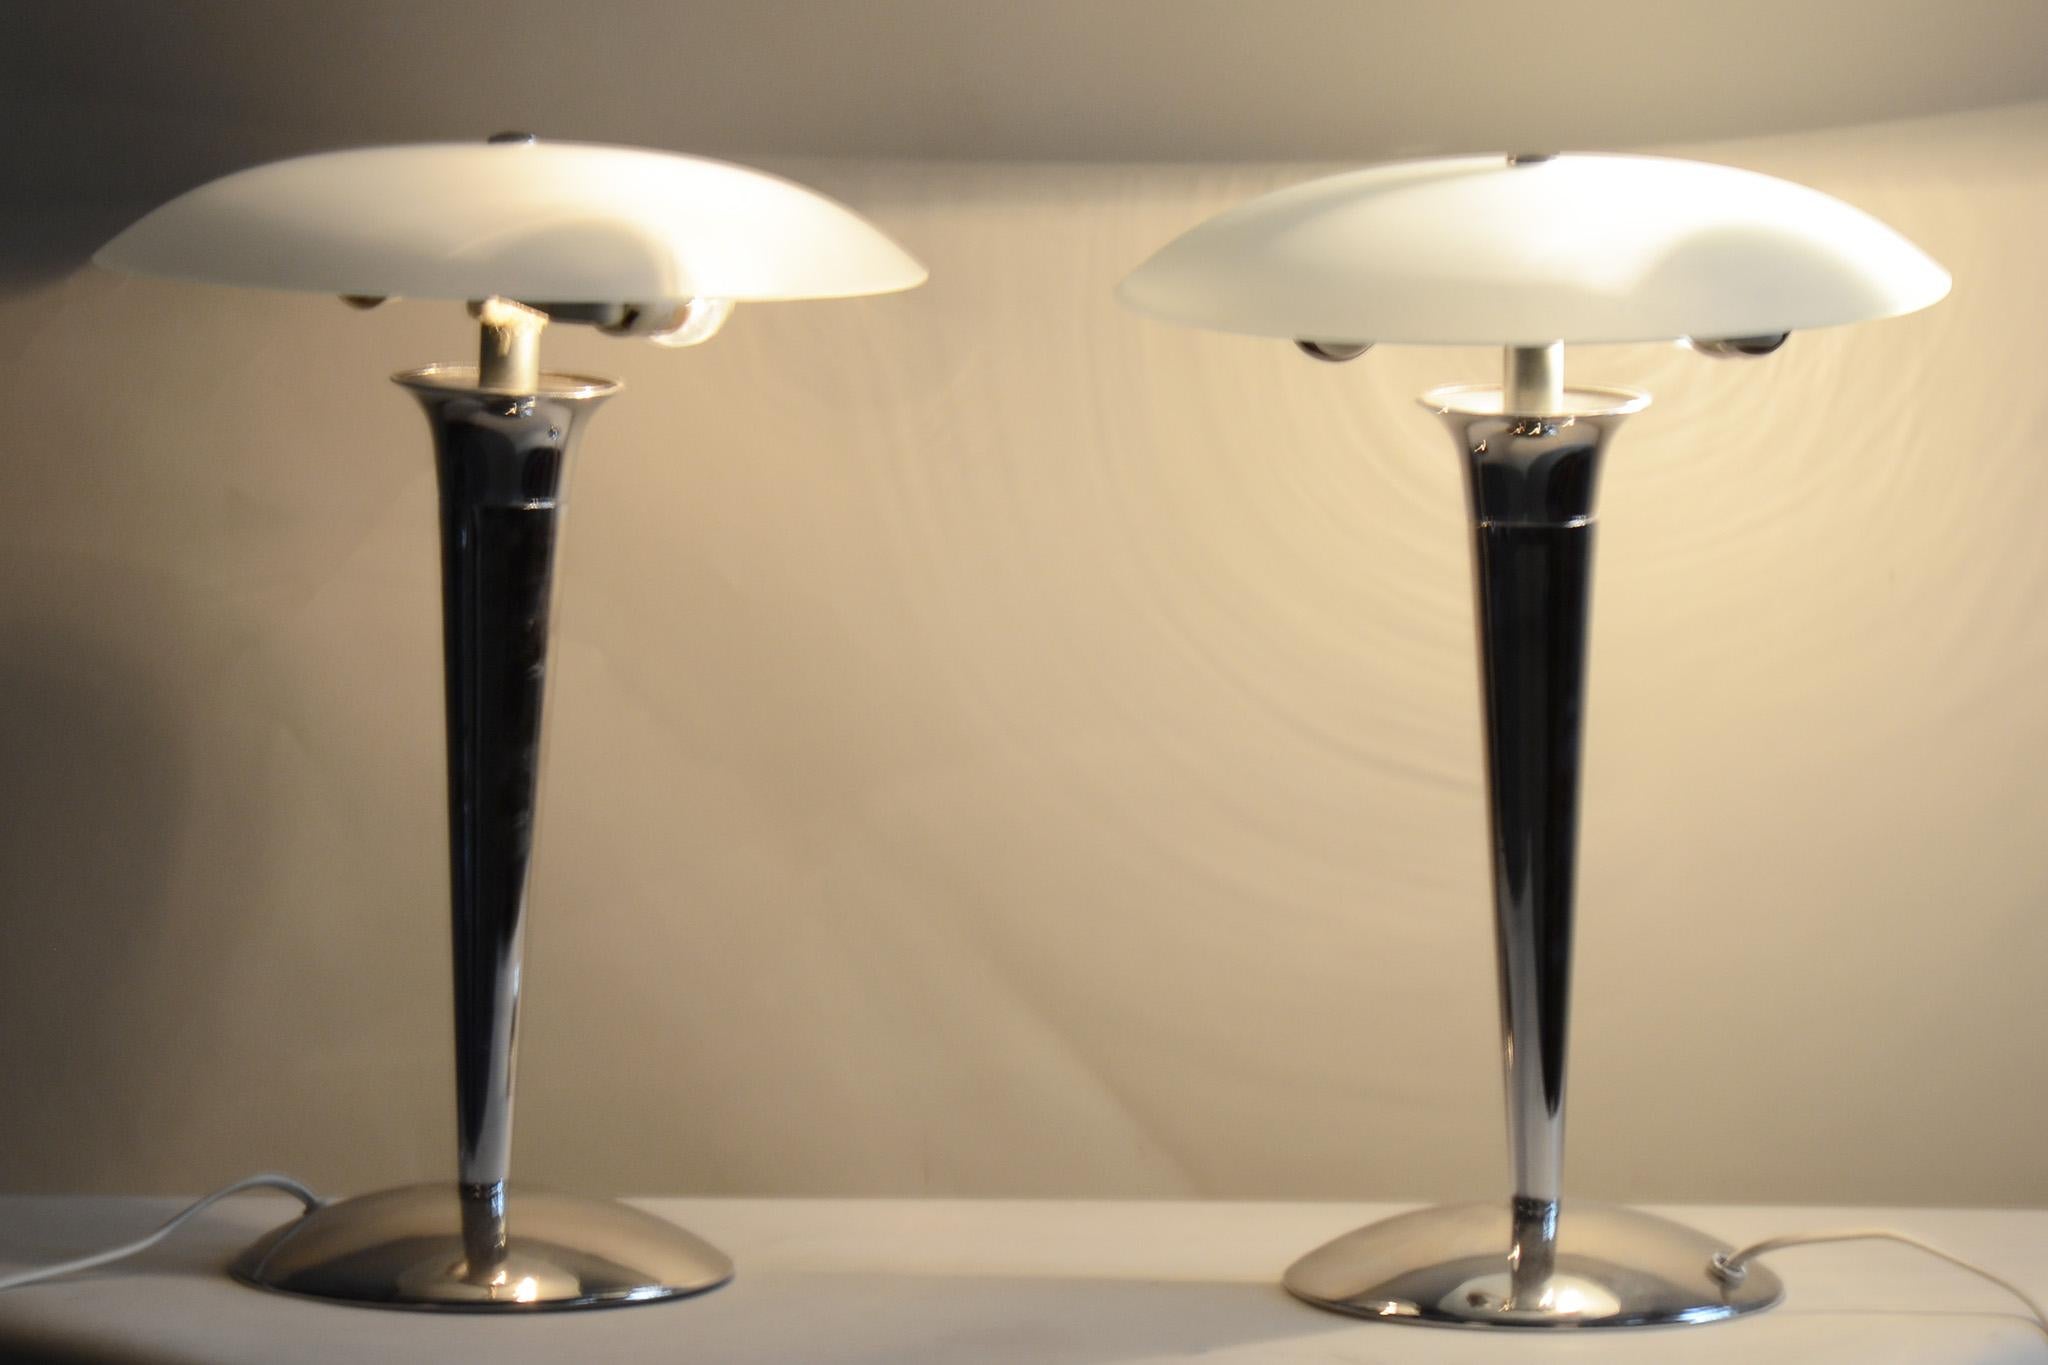 Pair of midcentury table lamps.

Period: 1950-1959
Source: Germany
Material: Chrome-Plated Steel, Milk Glass

It has been fully restored by our professional refurbishing team in Czechia according to the original process. The chrome parts have